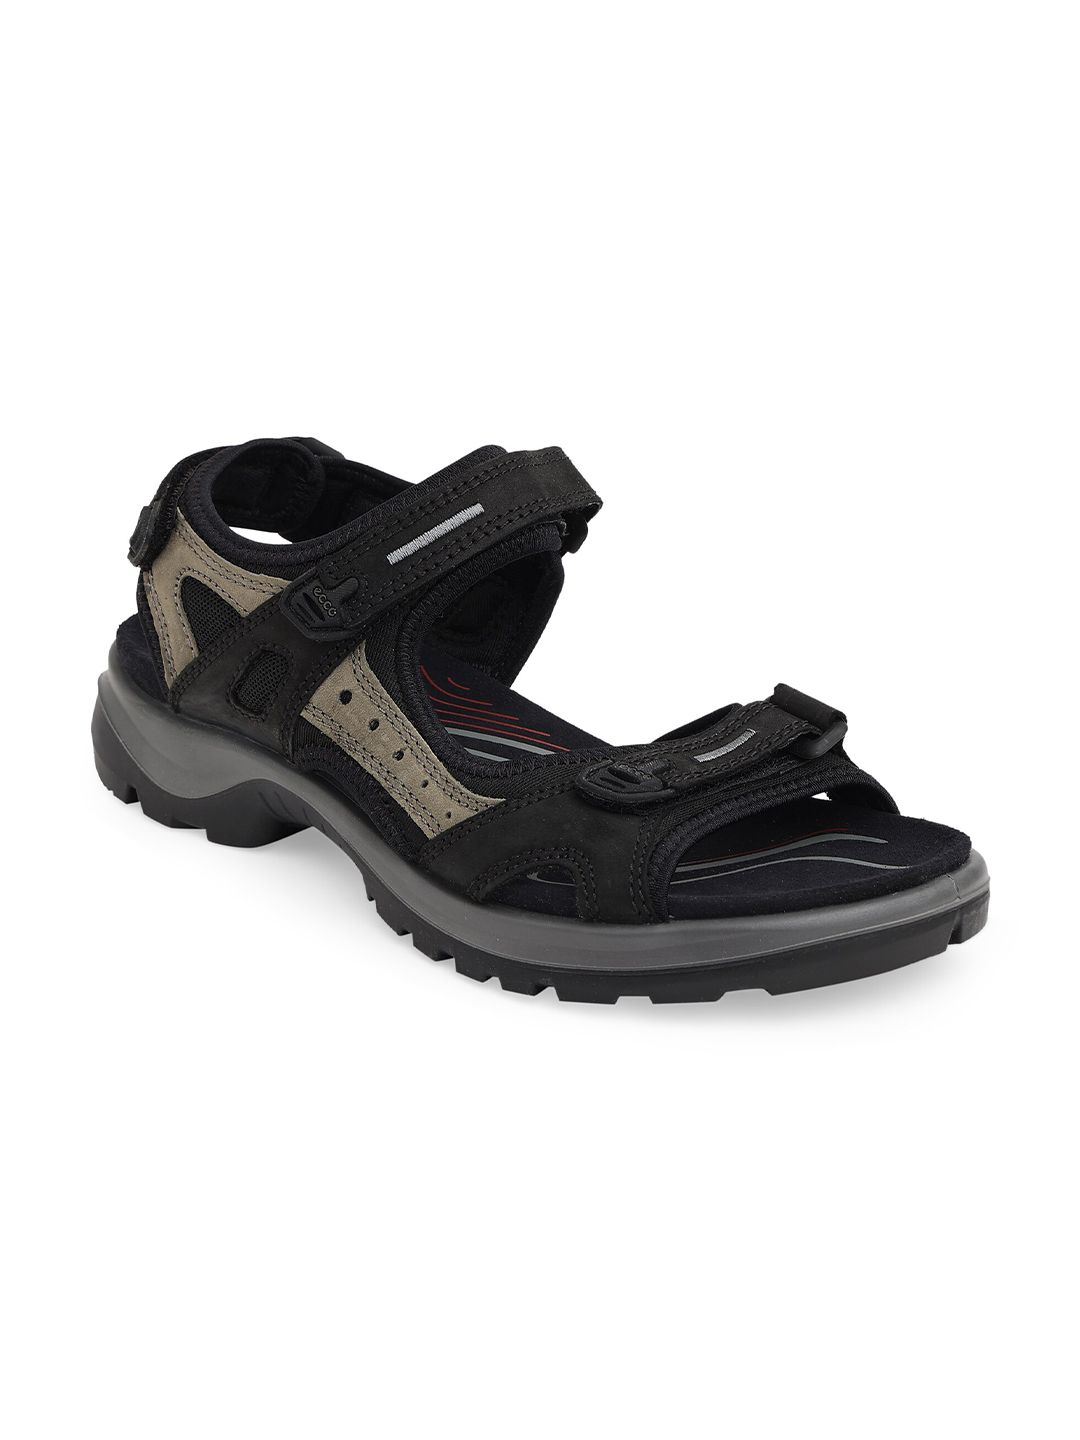 ECCO Women Black Solid Leather Sports Sandals Price in India